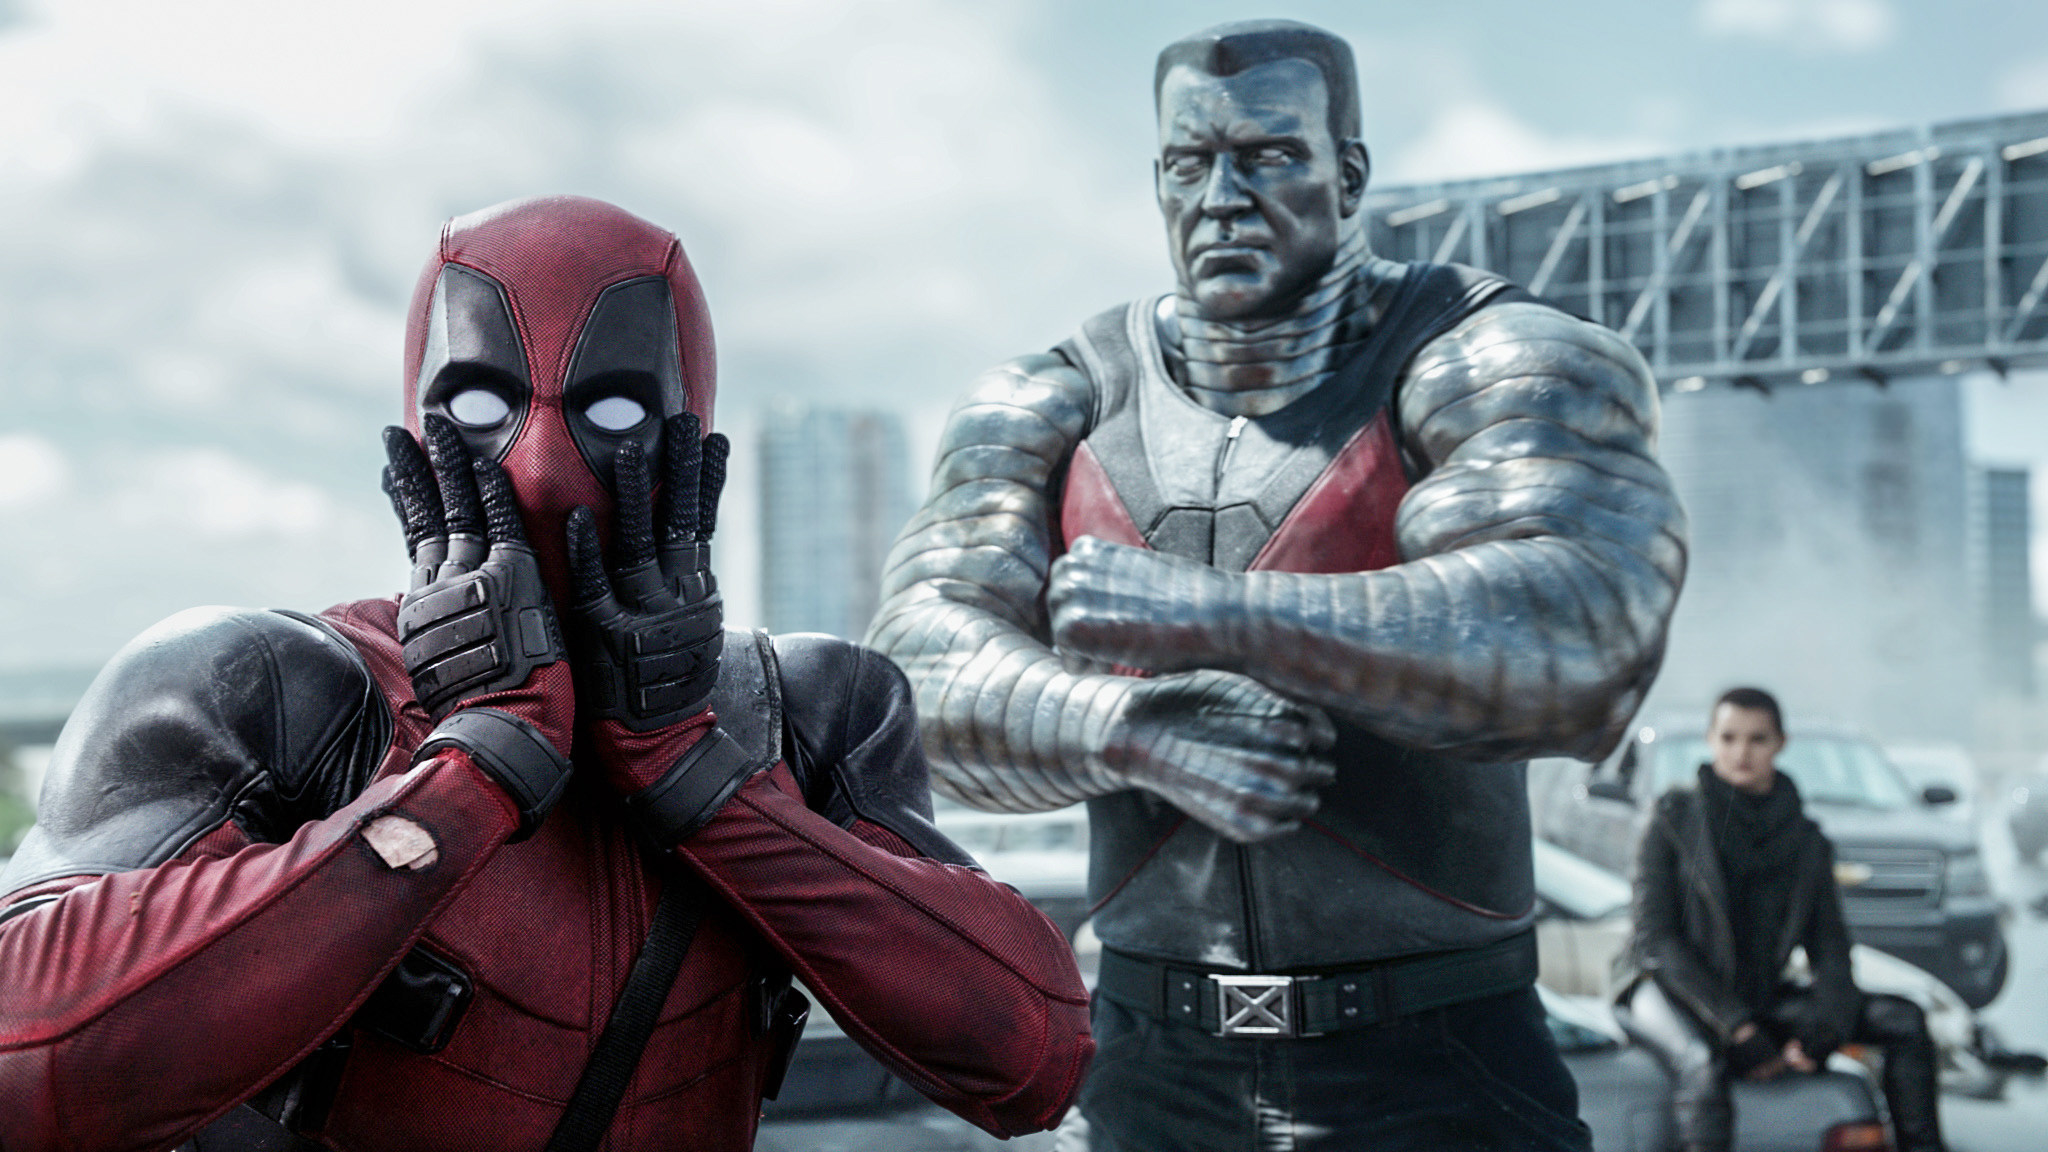 Deadpool and Colossus stand on the highway